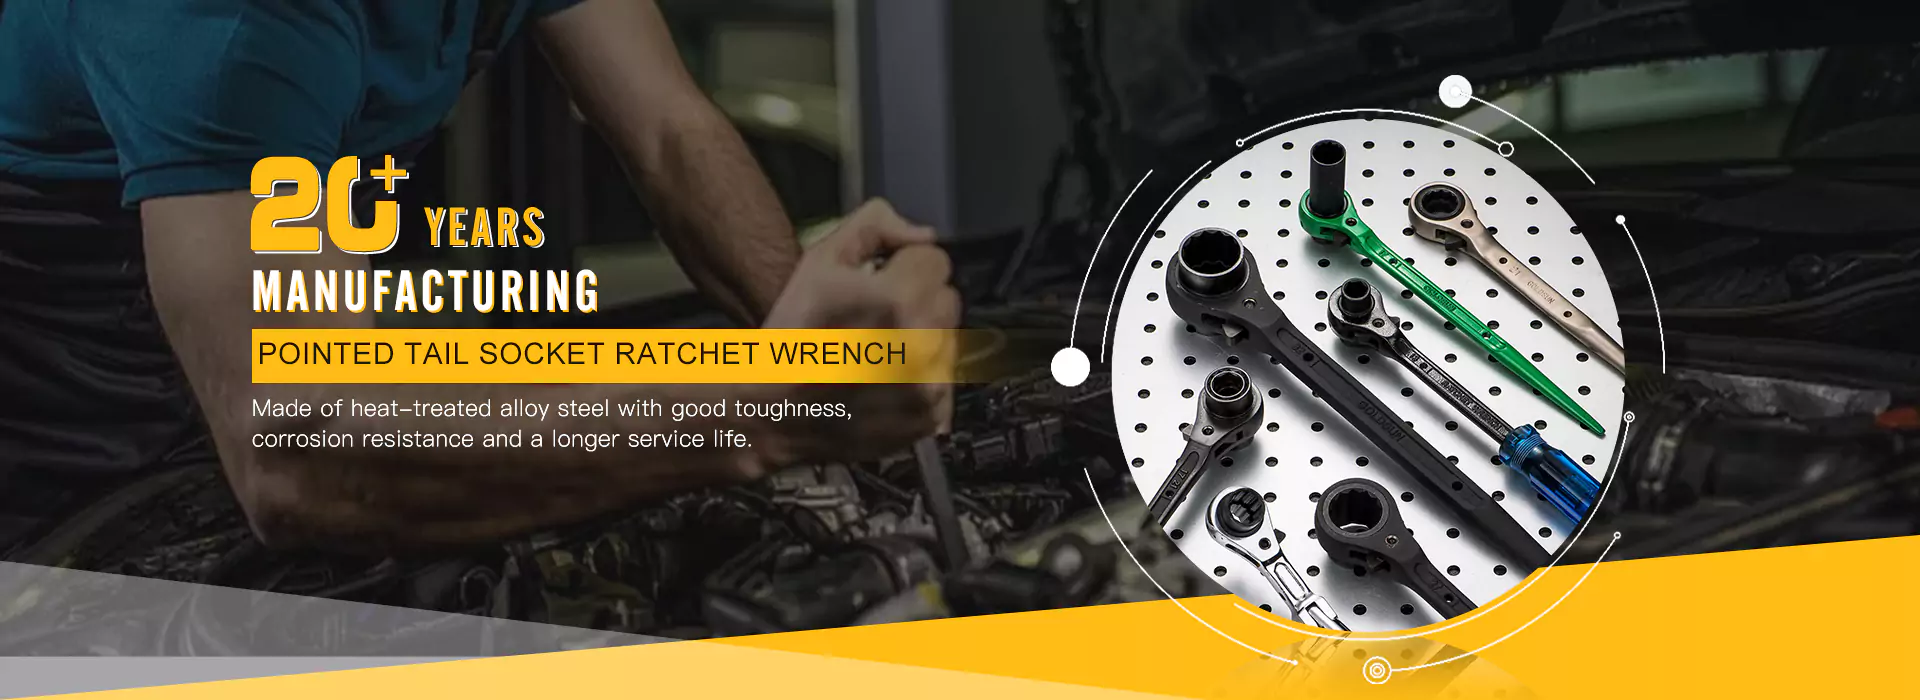 Ratchet Socket Wrench Manufacturers